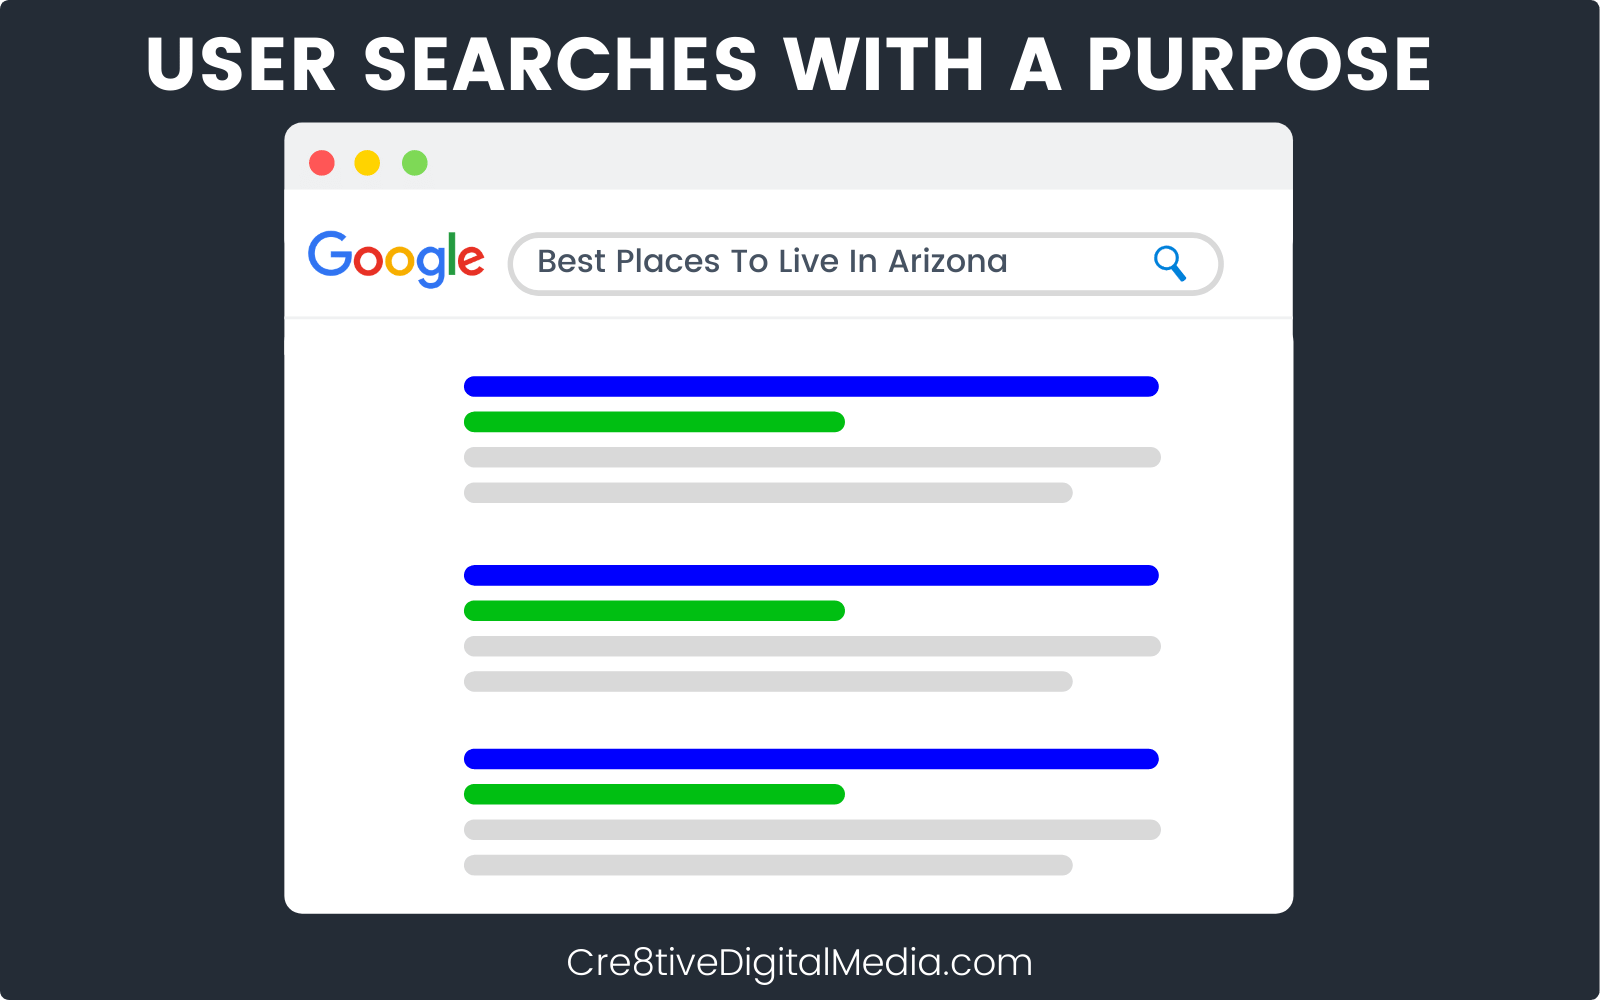 User Google searches “Best Places To Live in Arizona”